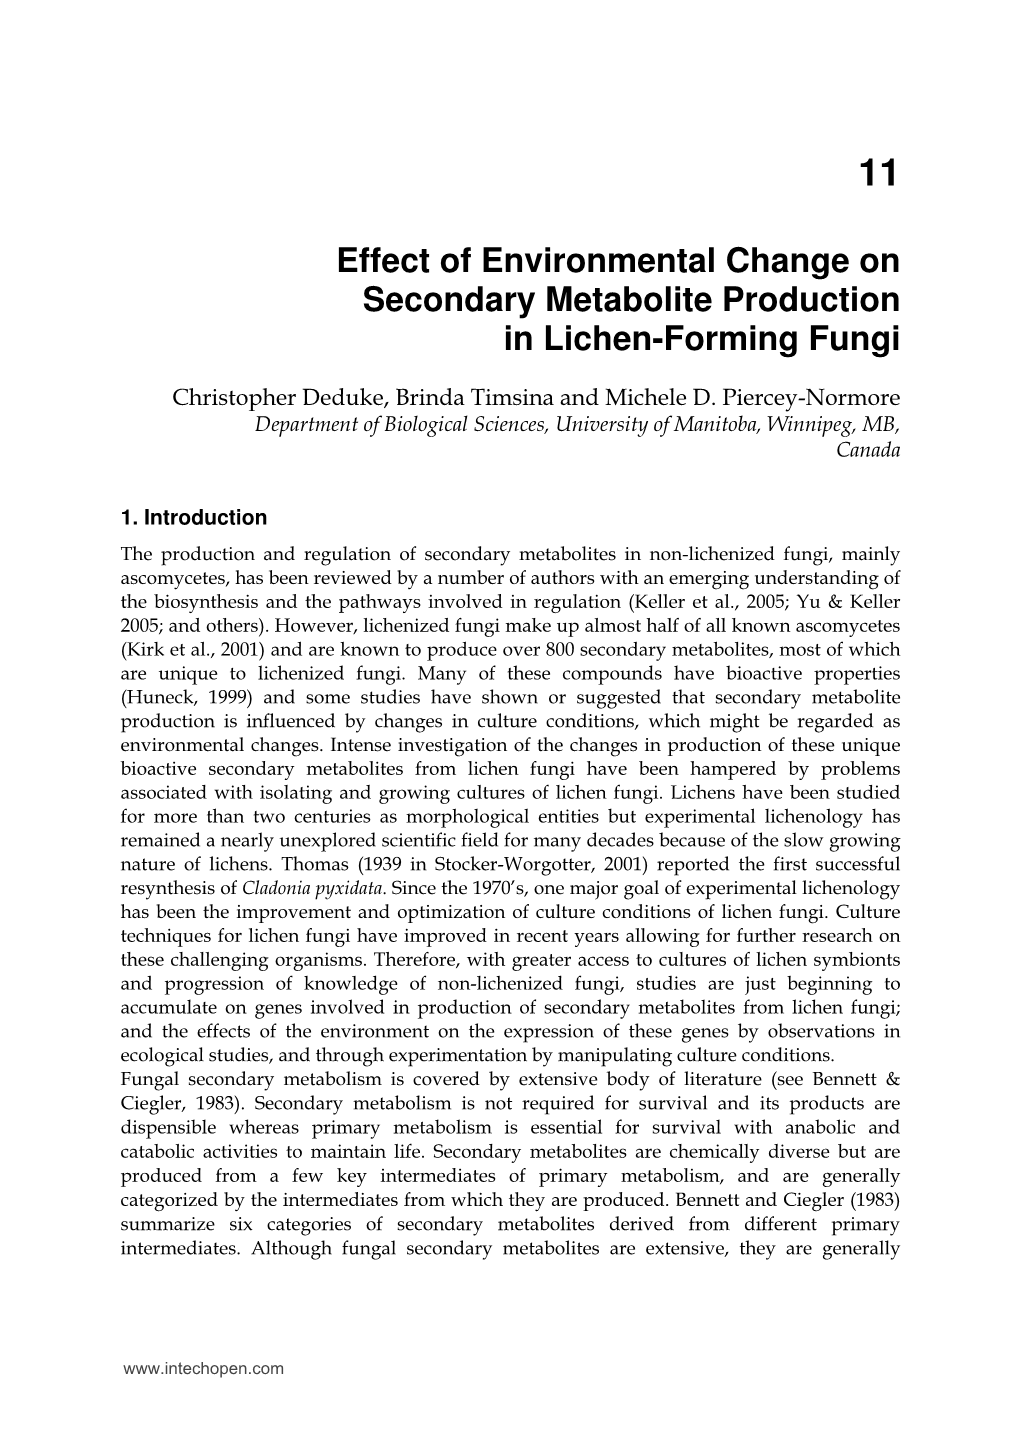 Effect of Environmental Change on Secondary Metabolite Production in Lichen-Forming Fungi